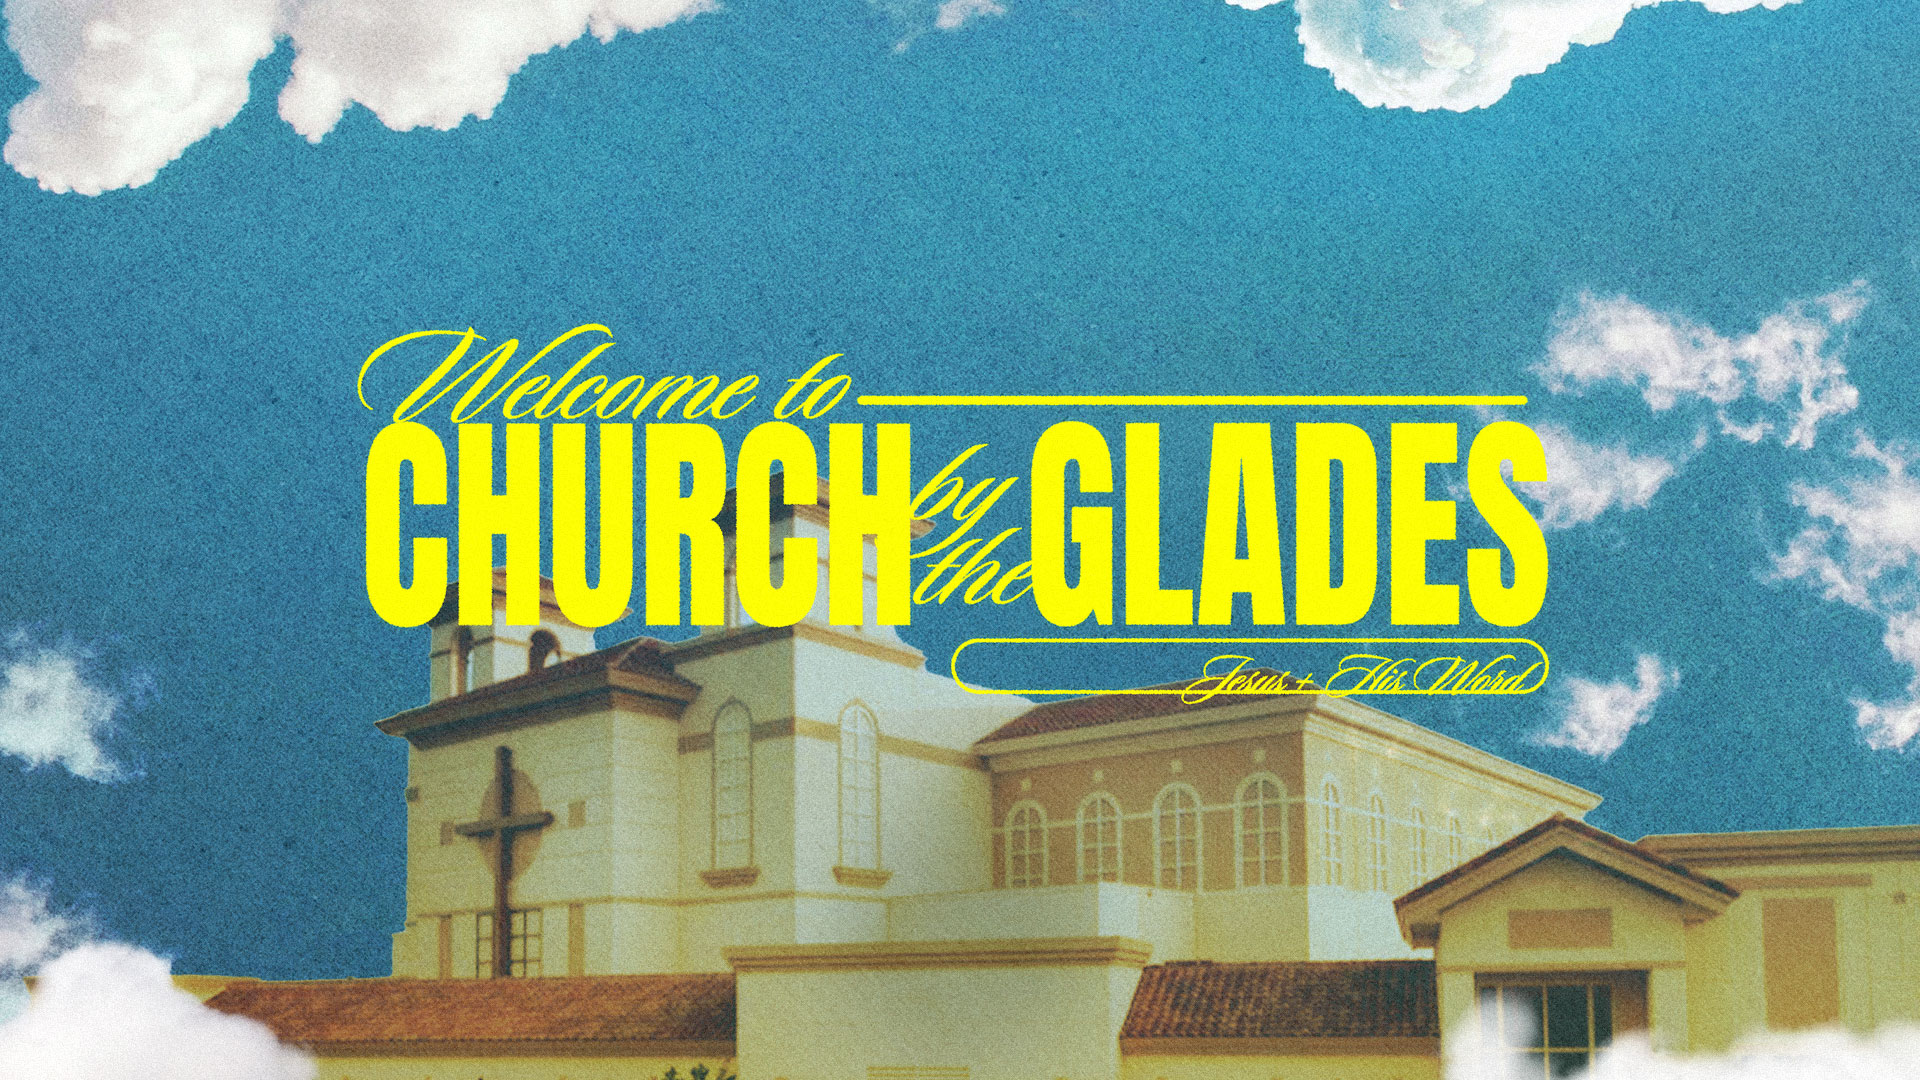 Welcome to The Church By the Glades 